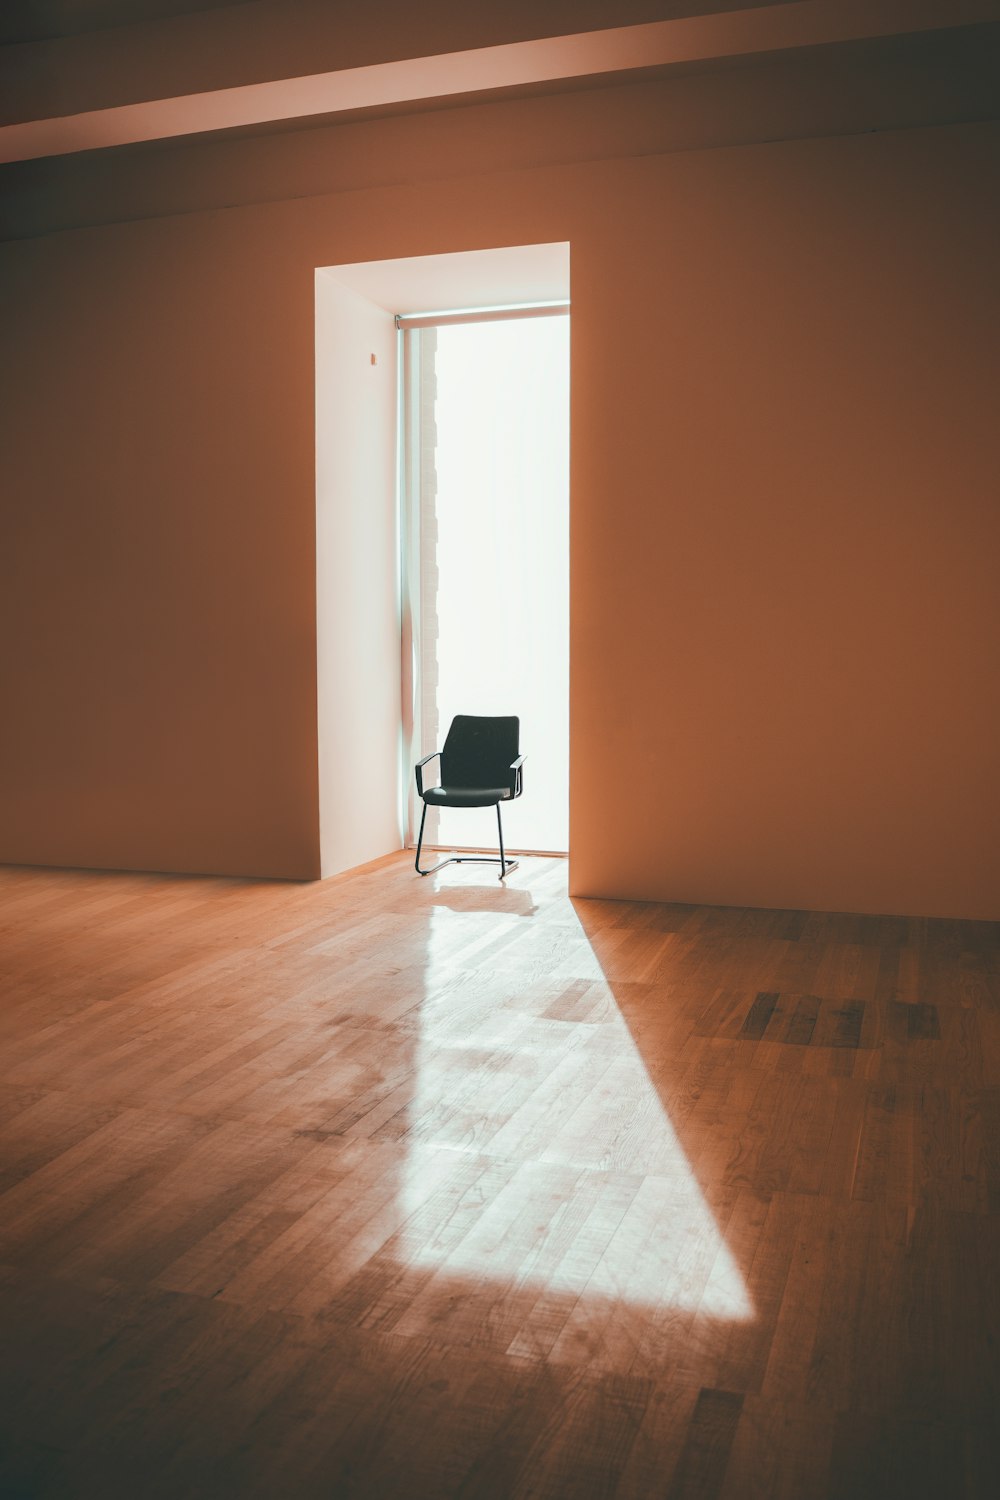 a chair is sitting in the middle of a room